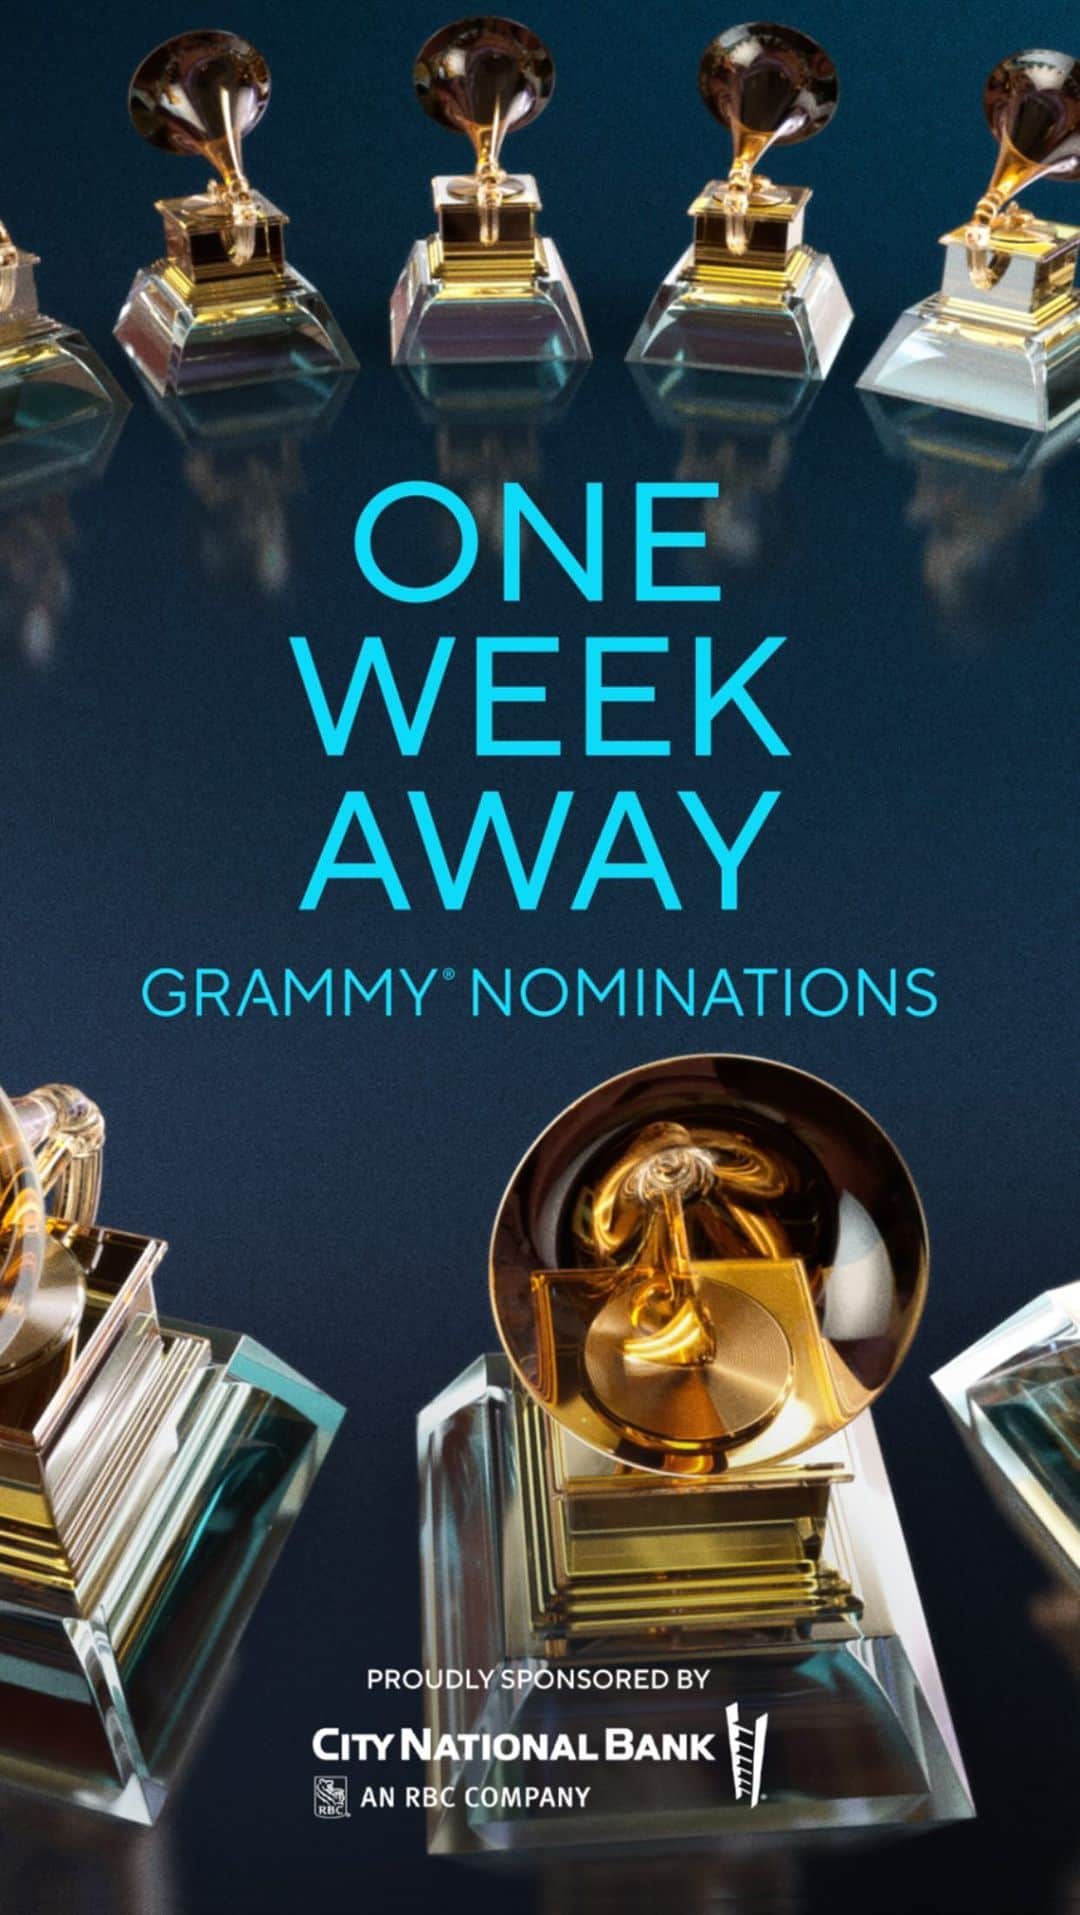 The GRAMMYsのインスタグラム：「🗓 One more week until we reveal the nominees for the 66th #GRAMMYs!  ✨ Tune in to live.GRAMMY.com on November 10 to watch the announcement.  🎶 GRAMMY Nominations Pre-Show: 10:45 am ET / 7:45 am PT 🎶 Nominations Livestream Event: 11 am ET / 8 am PT 🎶 GRAMMY Nominations Wrap-Up Show: 11:25 am ET / 8:25 am PT  Proudly sponsored by @CityNationalBank.」